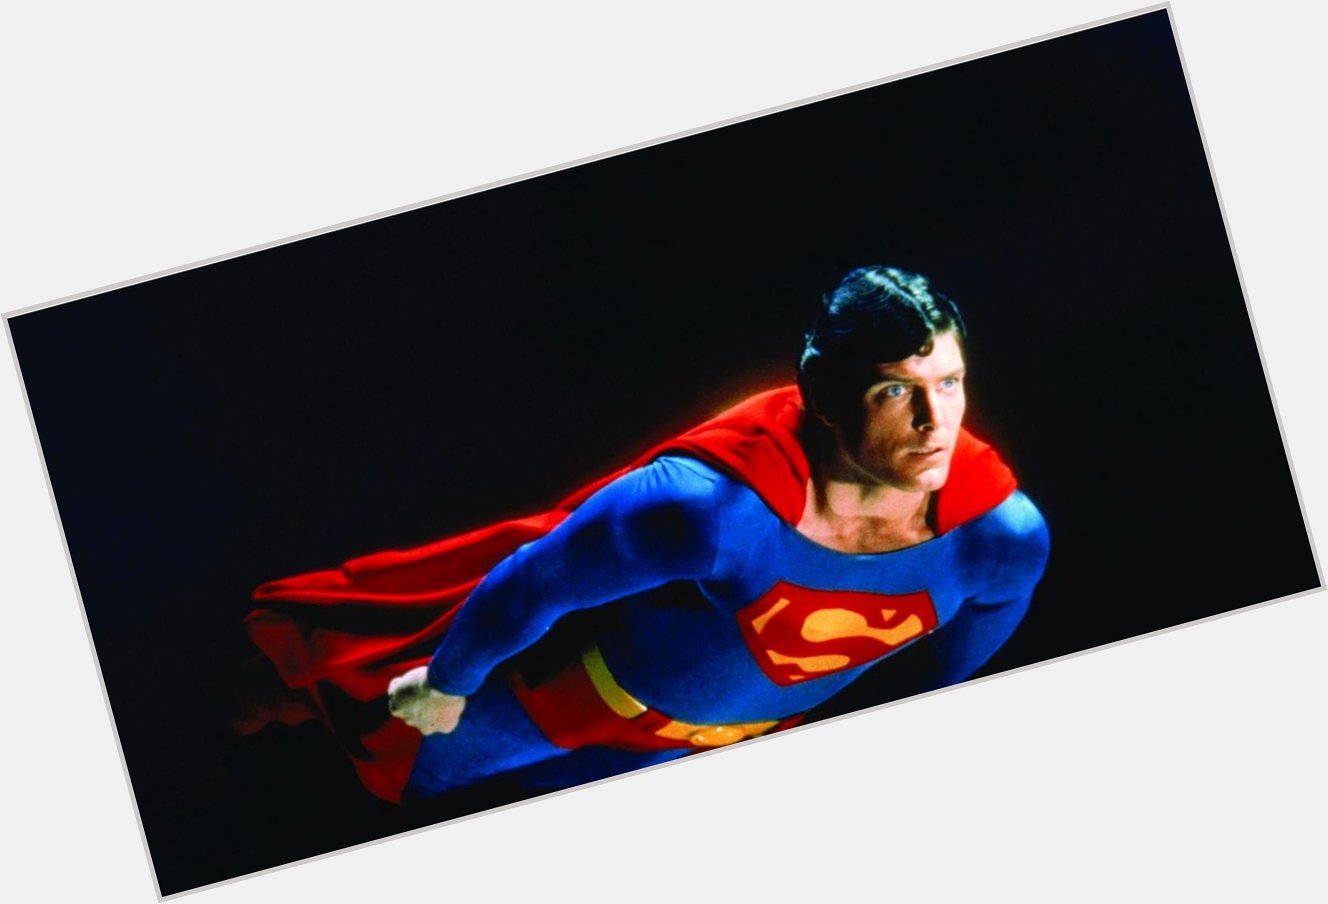 Happy Birthday to the true superman Christopher reeve... never forgotten 